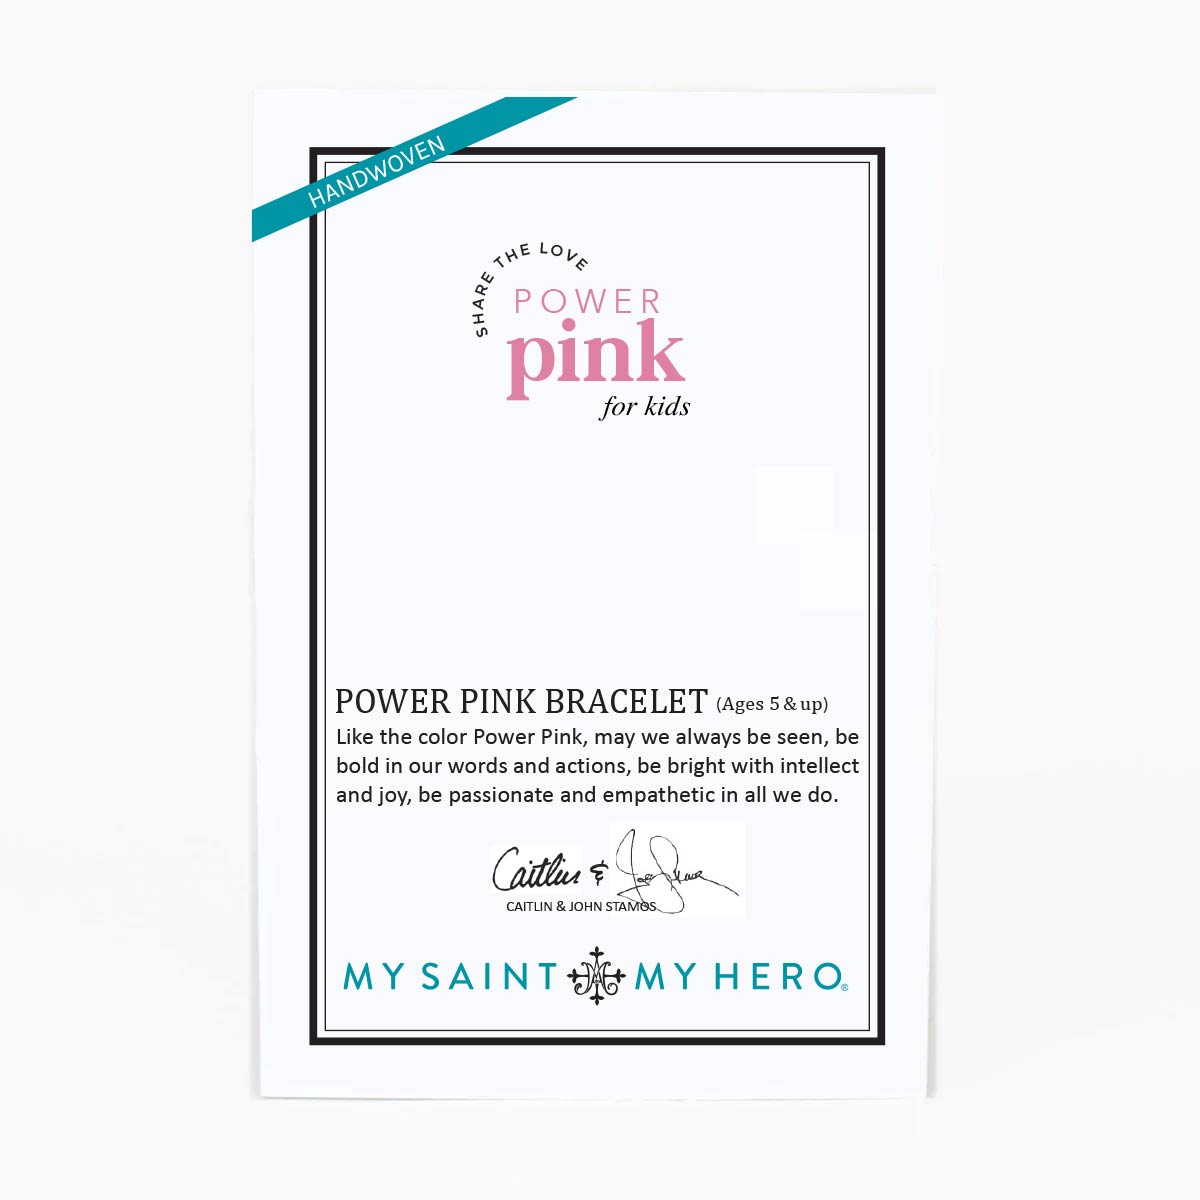 Share the Love Power Pink Bracelet for Kids by My Saint My Hero